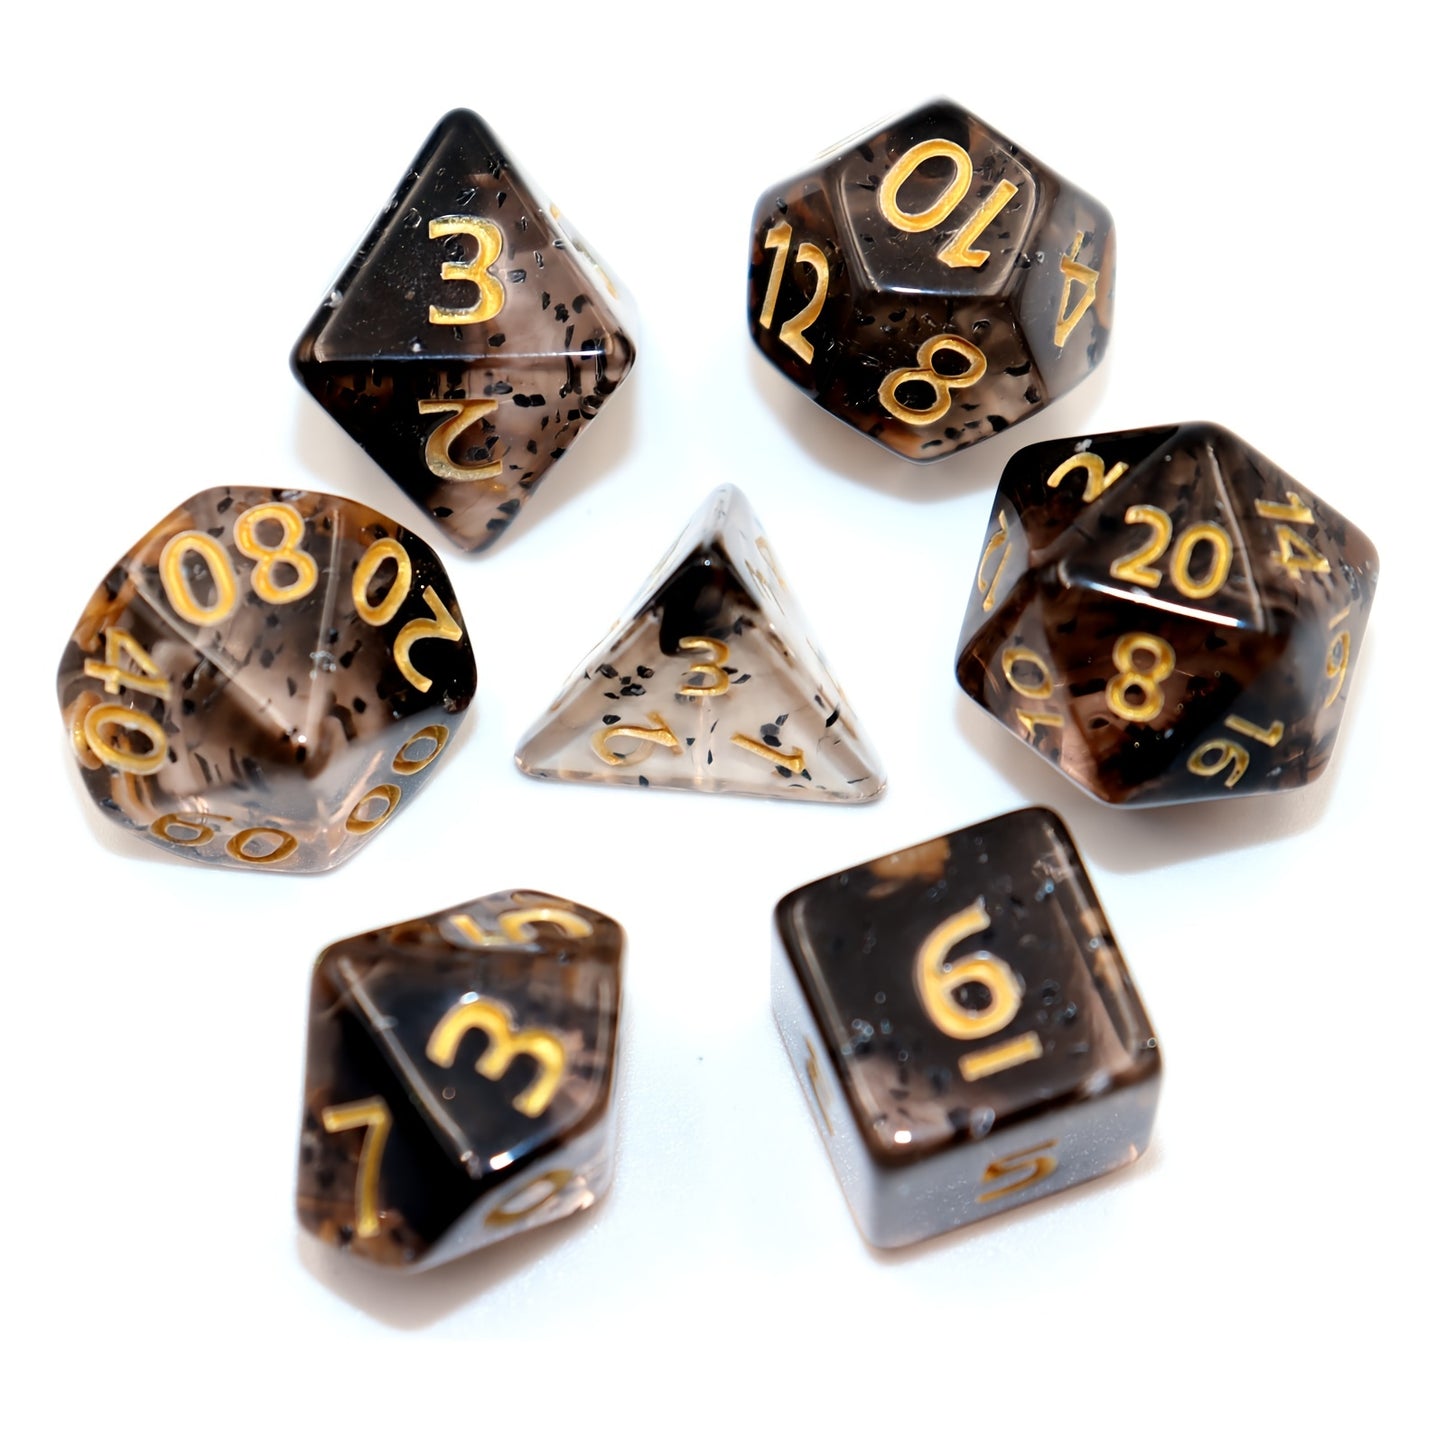 FREE Today: Crystal Style DnD Dice Set